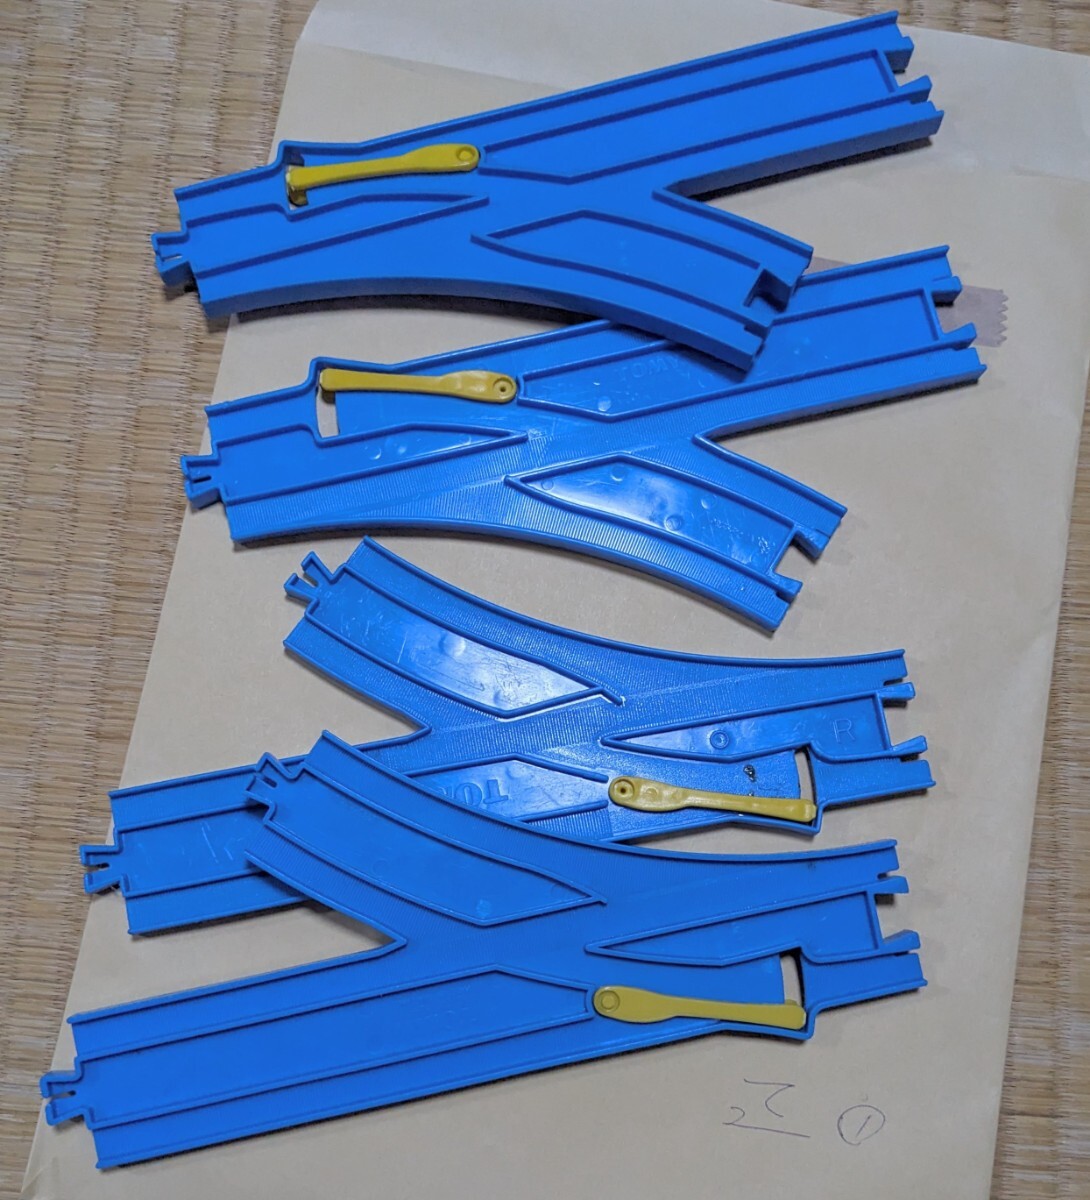  roadbed Plarail Turn out po in trail A&B each 2 ps total 4ps.@① including in a package possible ( sending 210~